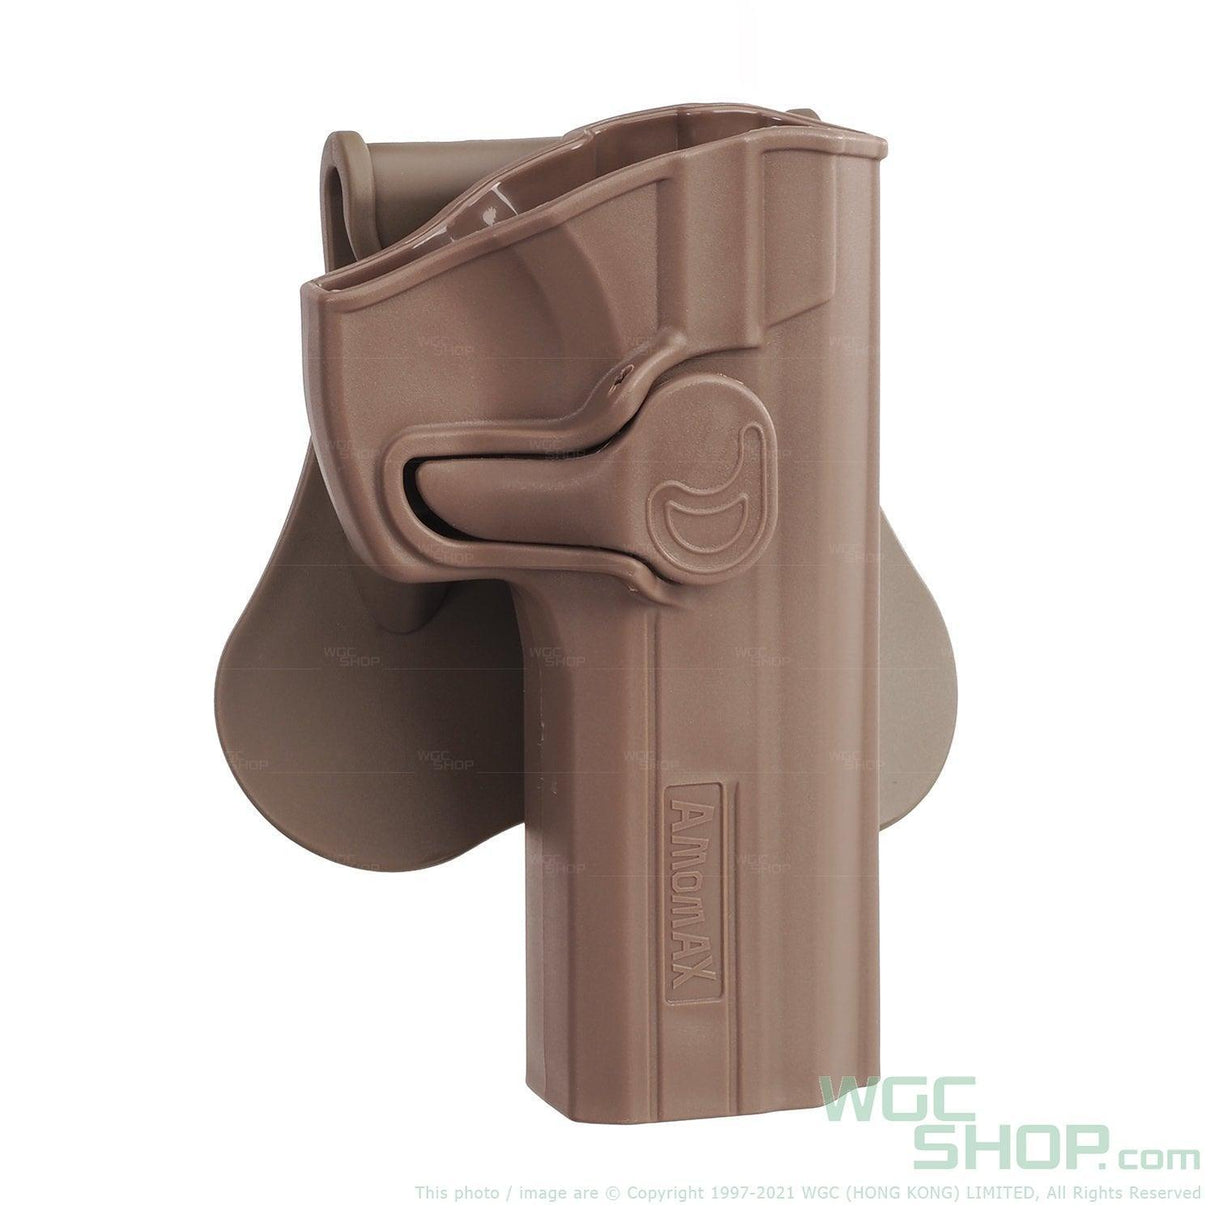 AMOMAX Paddle Holster for SP-01 - WGC Shop